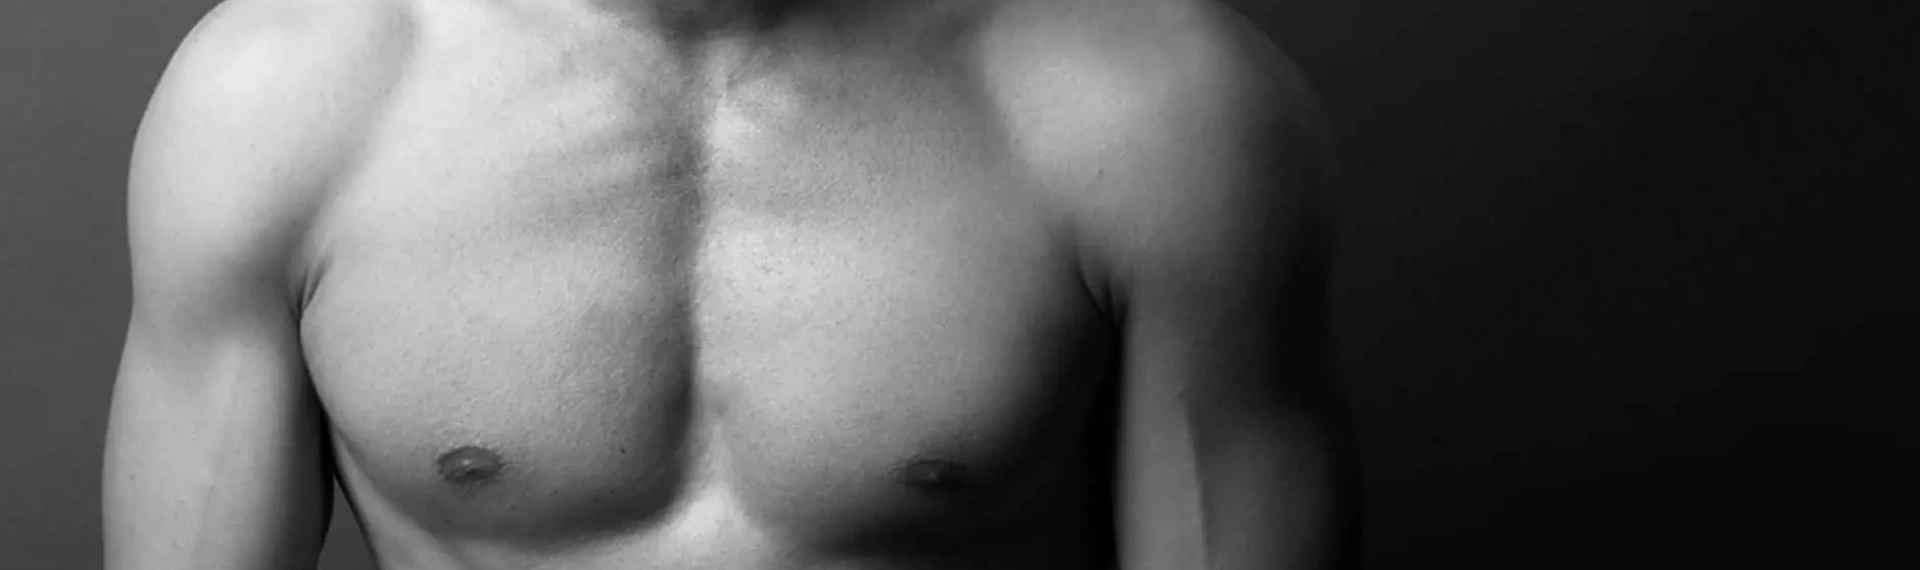 A black and white photo of a shirtless man displaying gynecomastia before and after transformation.